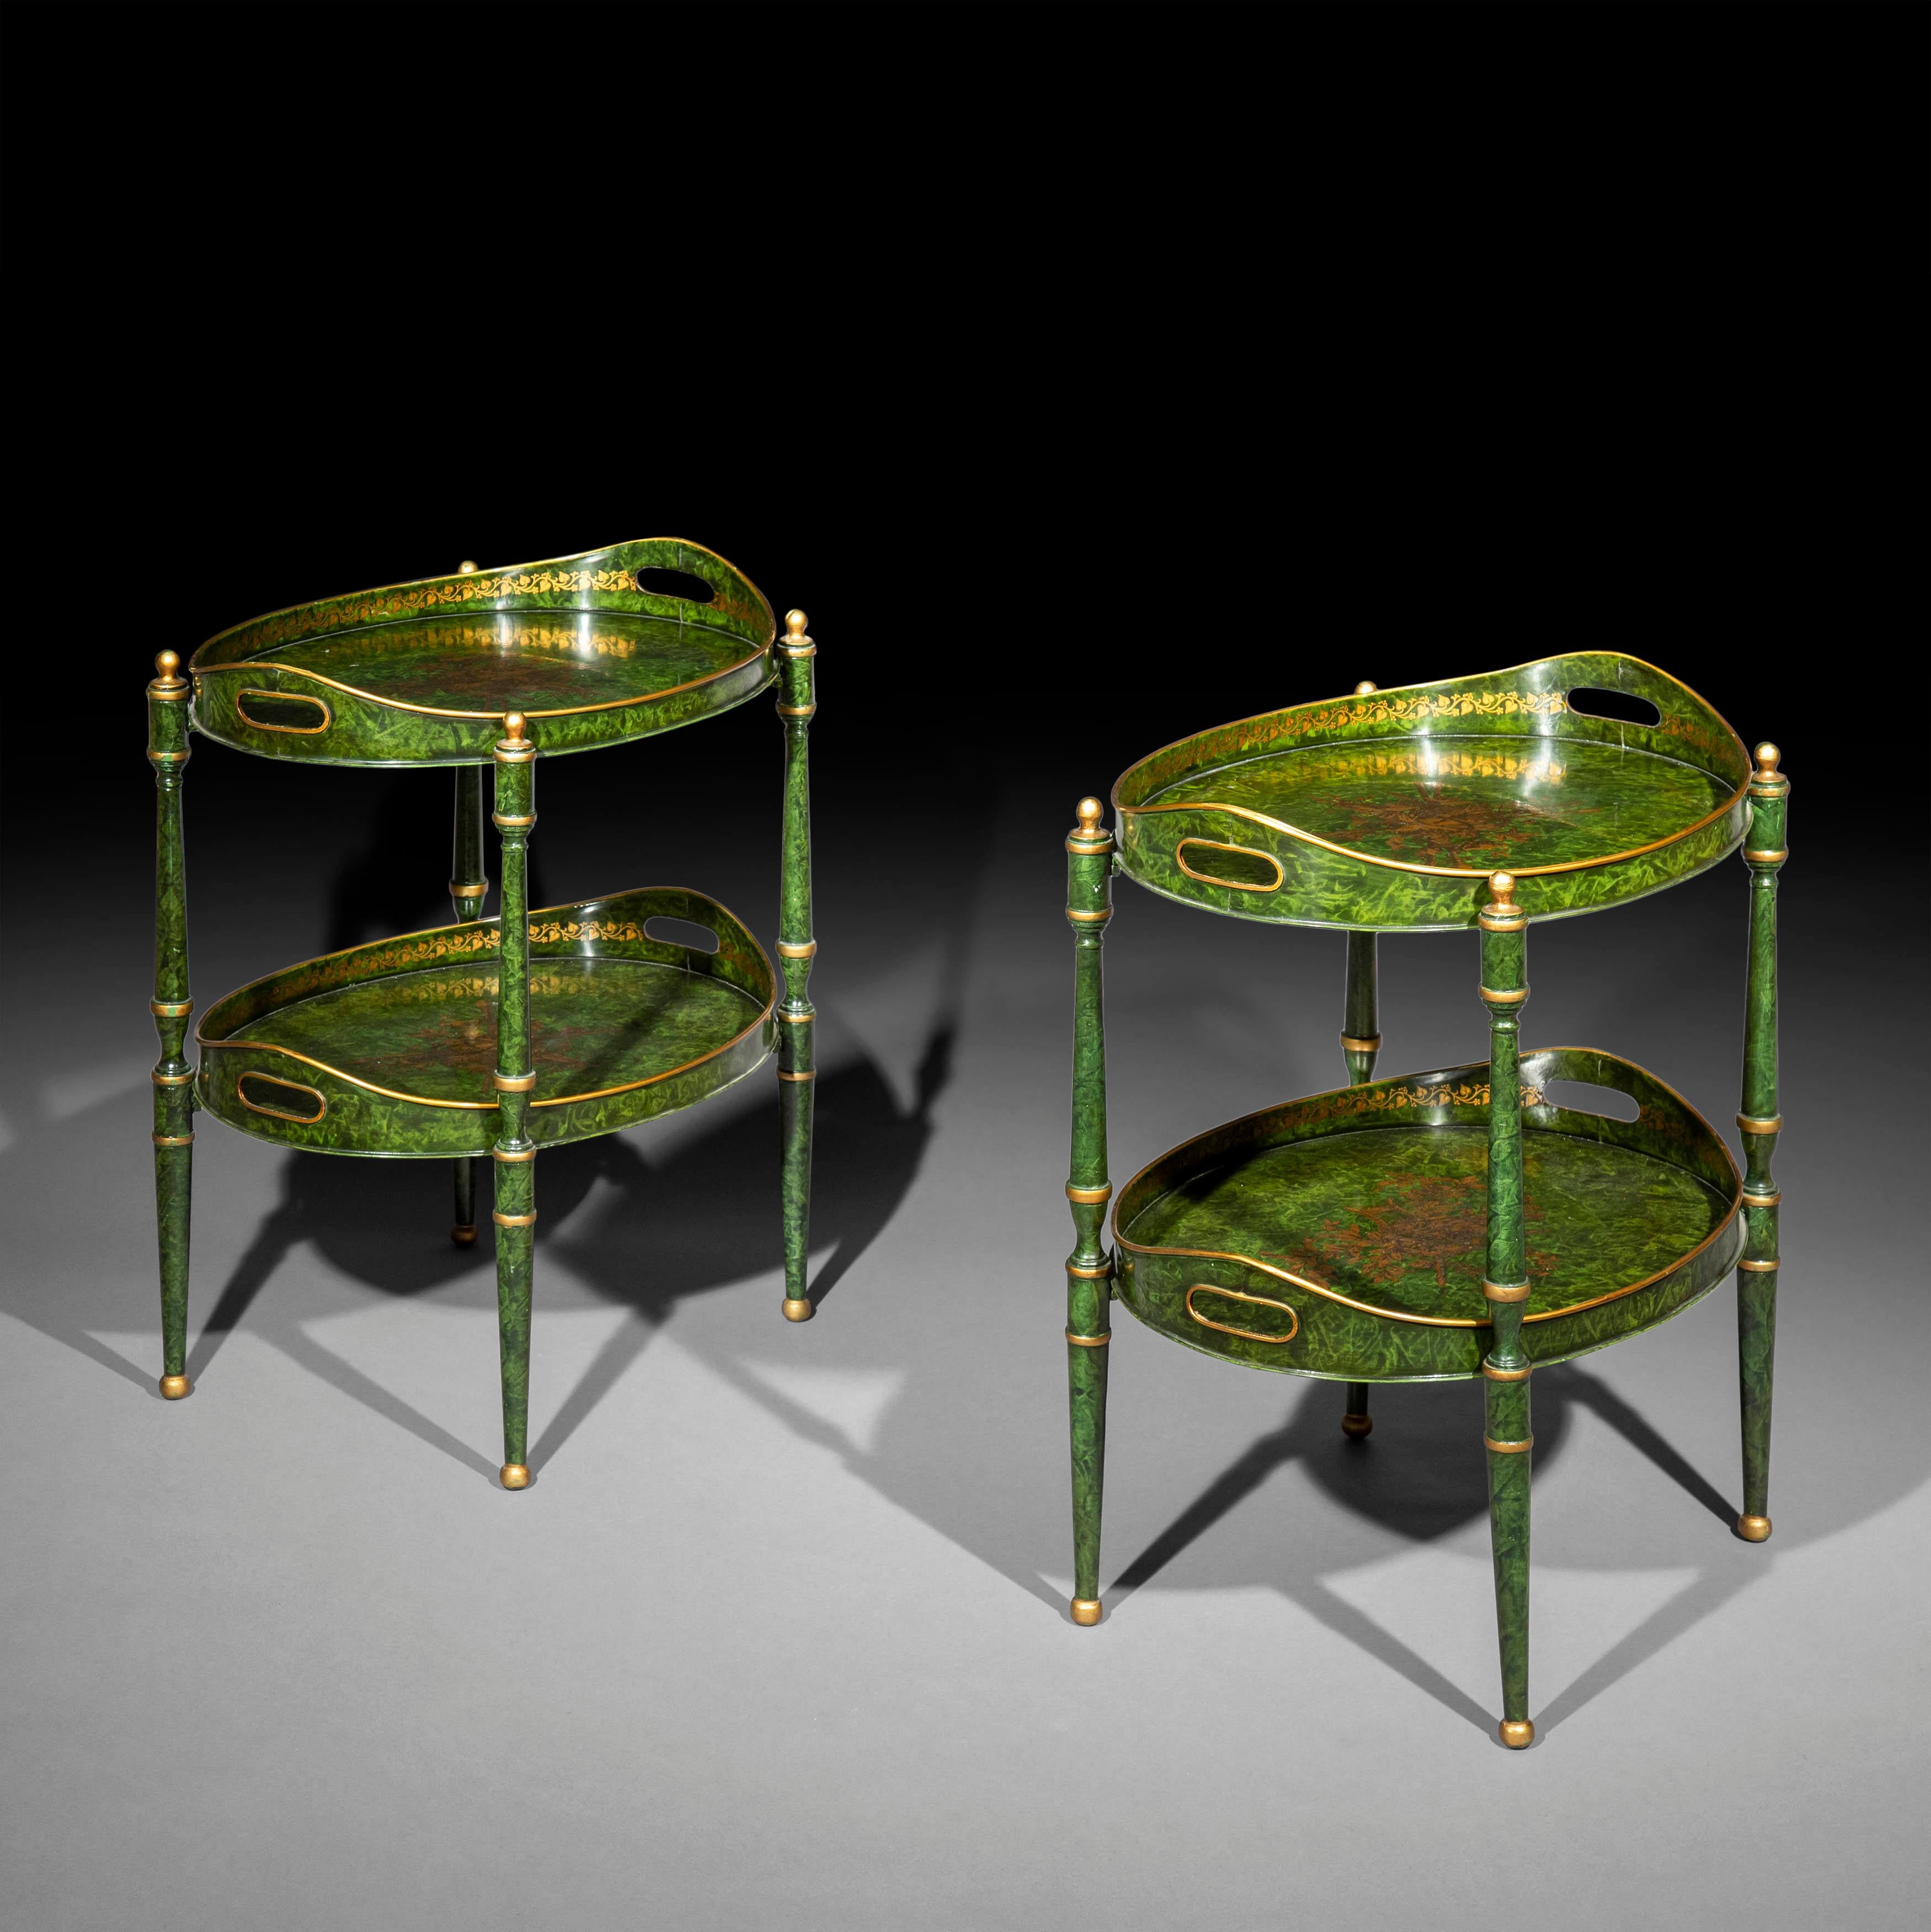 A charming pair of chinoiserie style toleware tray tables or étagères, painted green to simulate stained tortoiseshell.
Italian, third quarter of the 20th century.

Each formed of two trays supported by a folding frame.